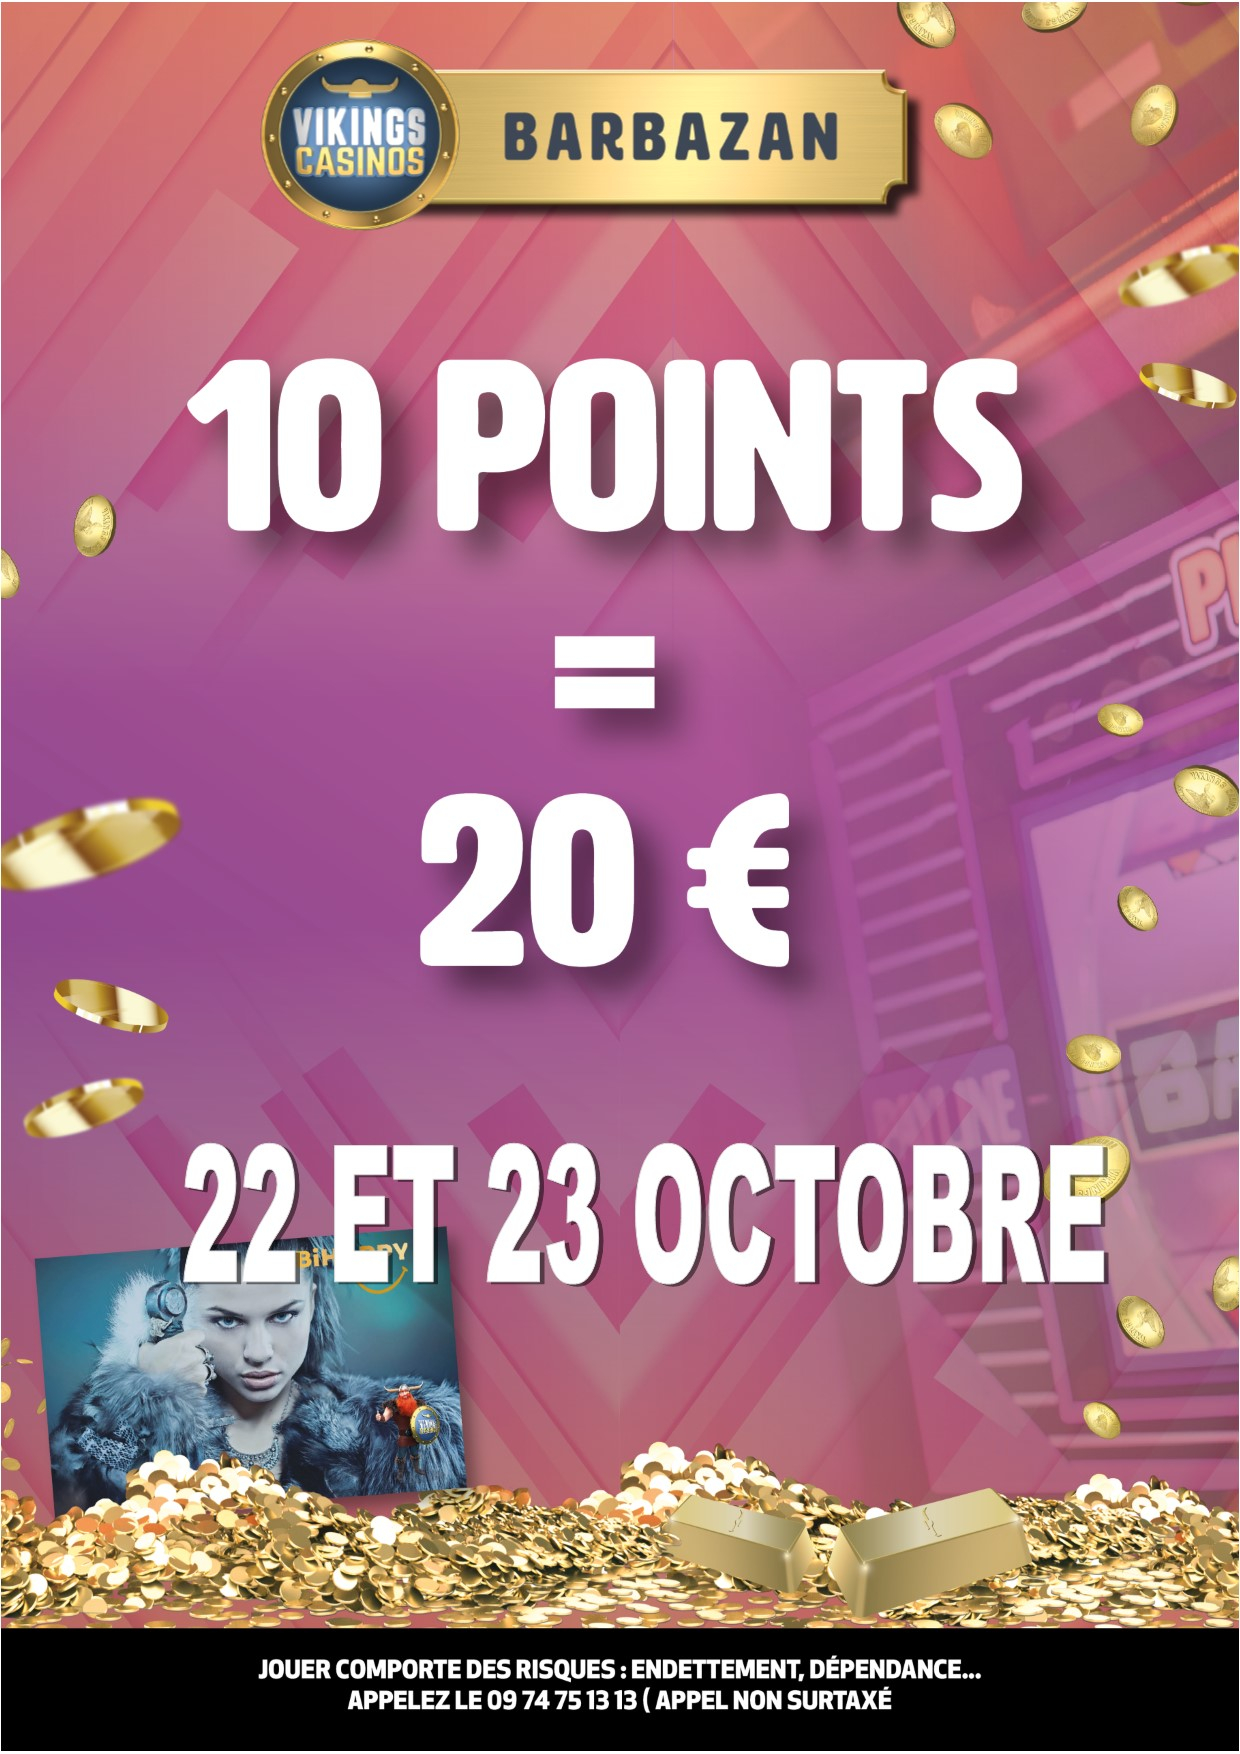 10 POINTS = 20€